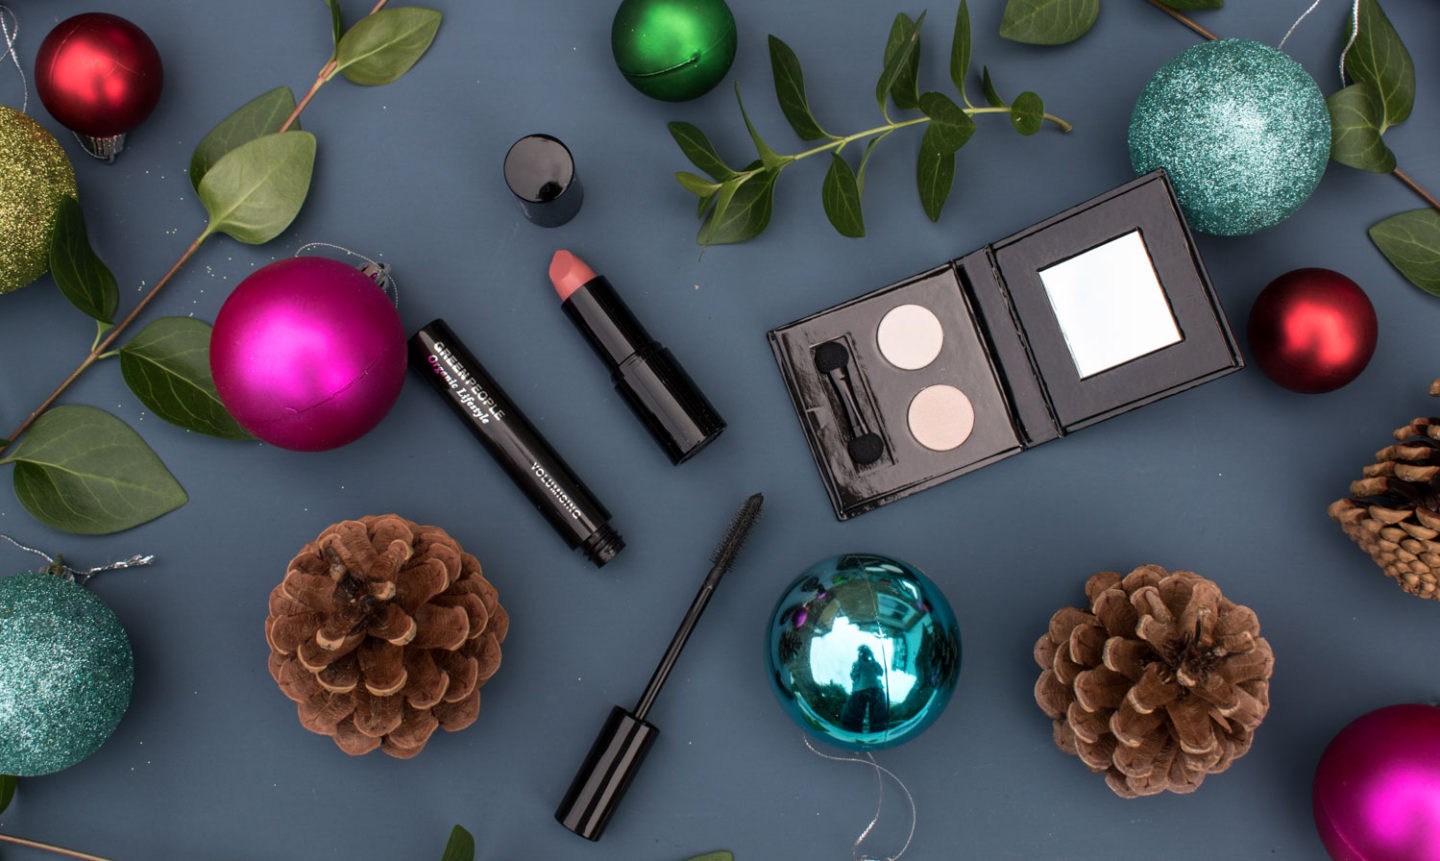 The full size make up products from Green People's Organic Beauty Advent Calendar